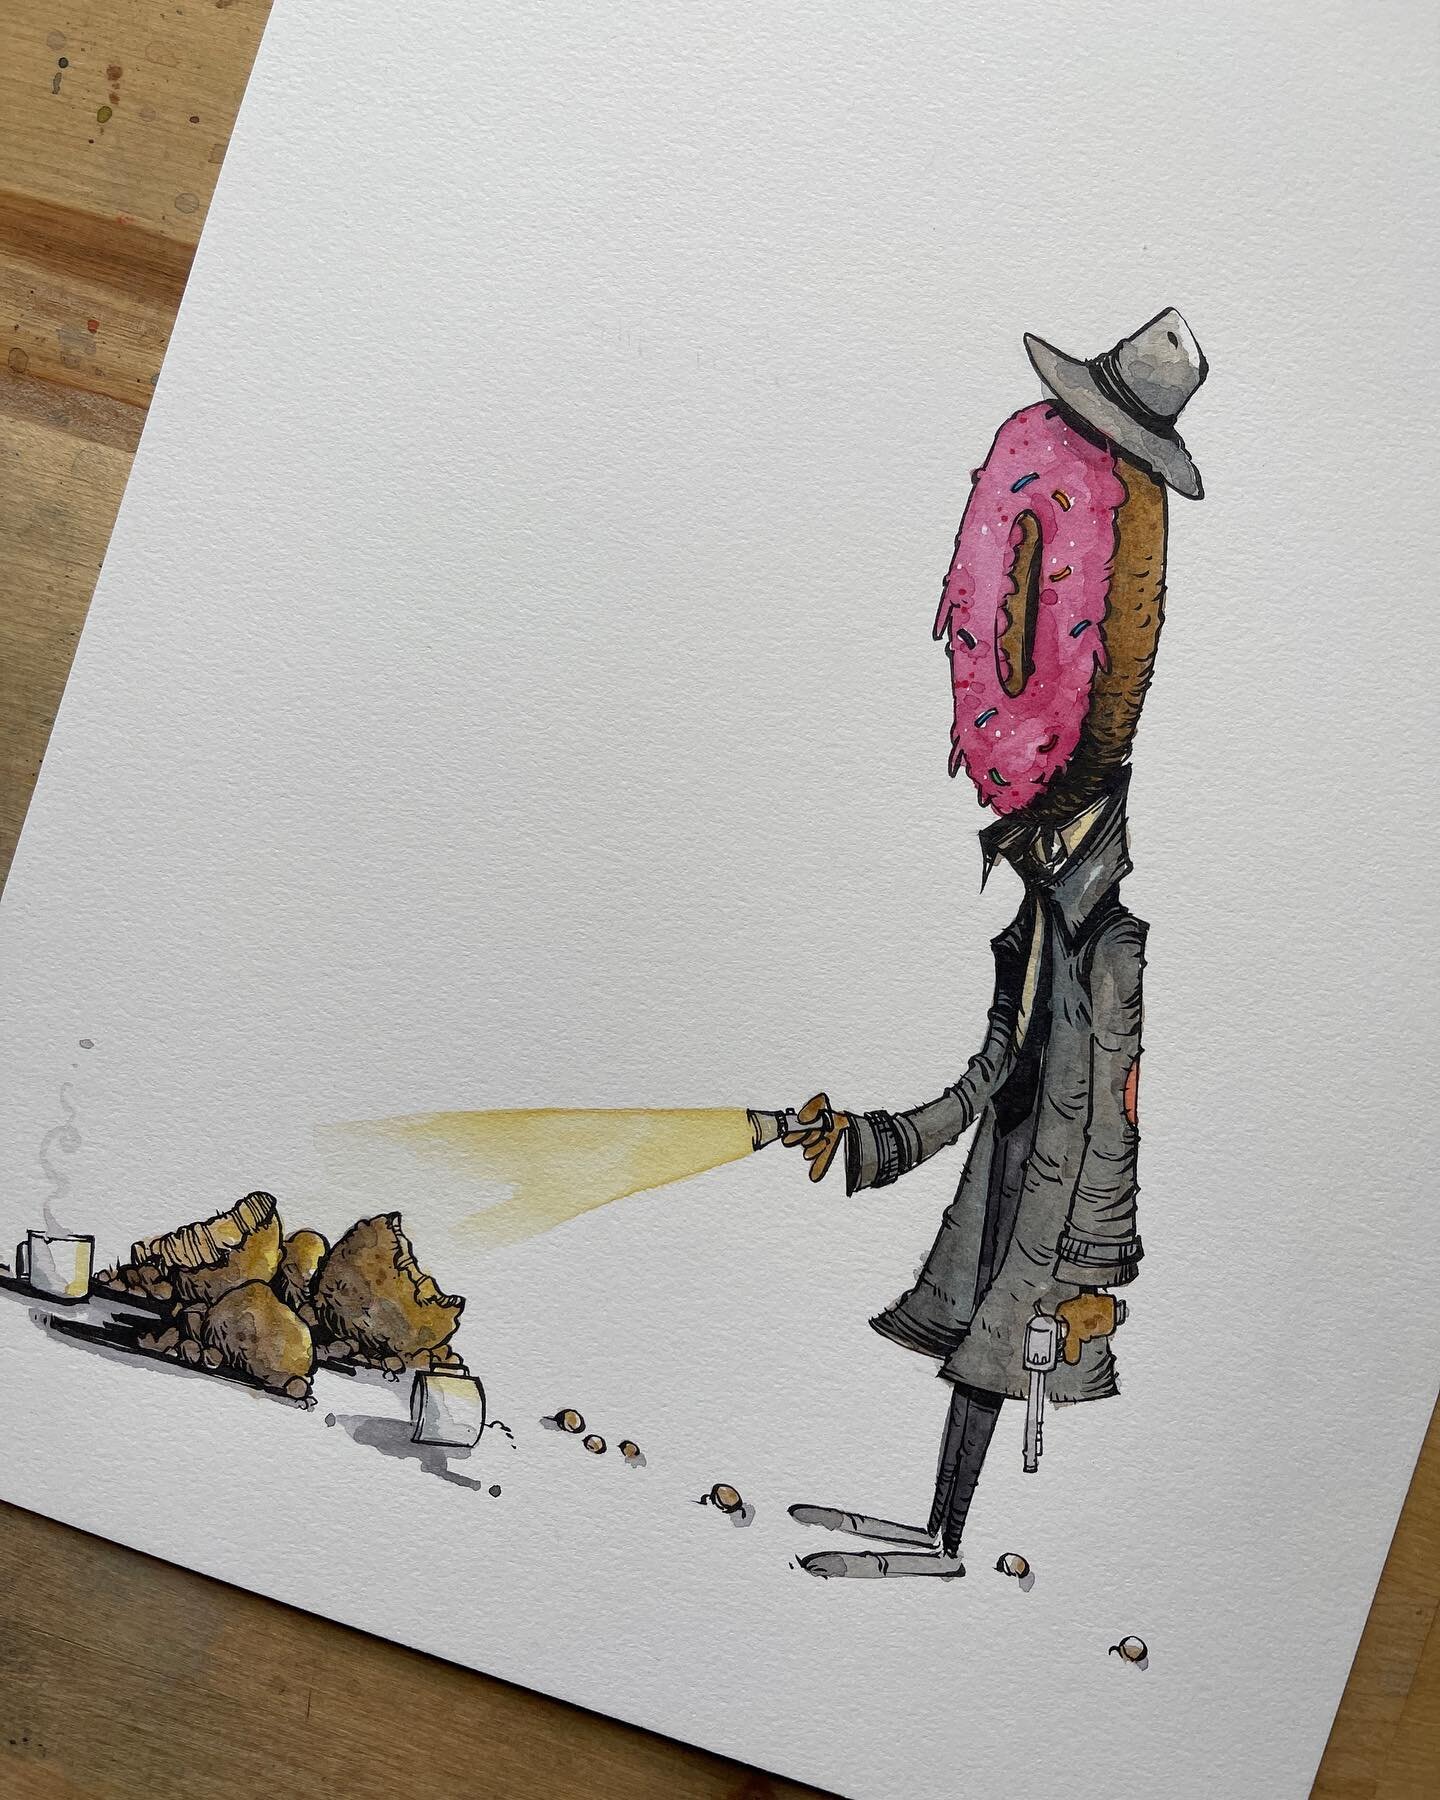 &ldquo;Oh God, the holes.&rdquo; #donutdetective from our #chaoticdrawalong a couple weeks ago.  Guys:  he&rsquo;s a detective AND a donut. #anthonywheelerart #illustration #watercolor #cartoonist #sketch